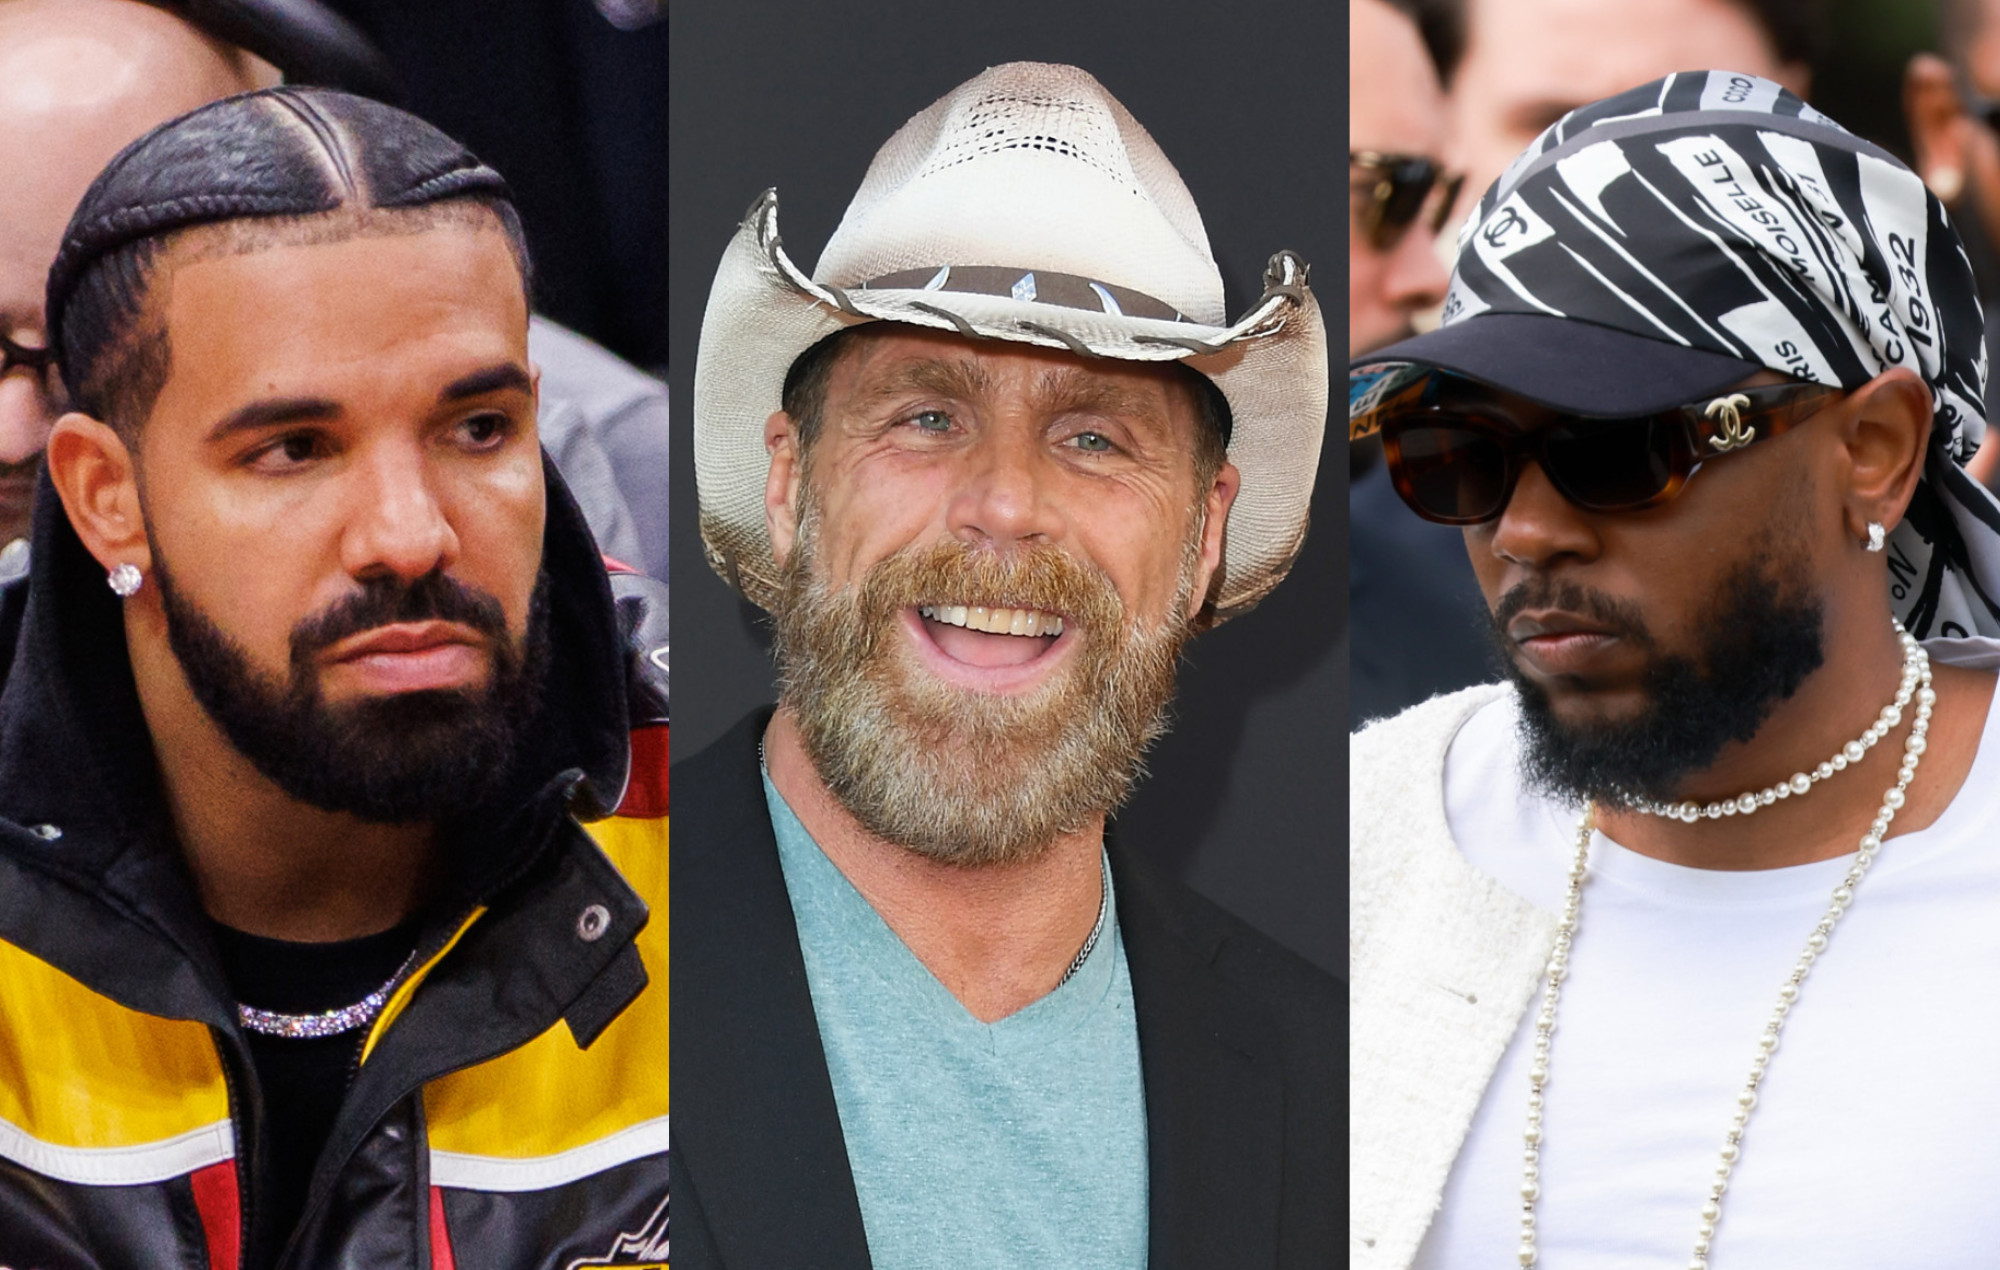 (From left to right) Drake, Shawn Michaels and Kendrick Lamar. Photo credit: Cole Burston/Getty Images; Jon Kopaloff/Getty Images; Arnold Jerocki/Getty Images